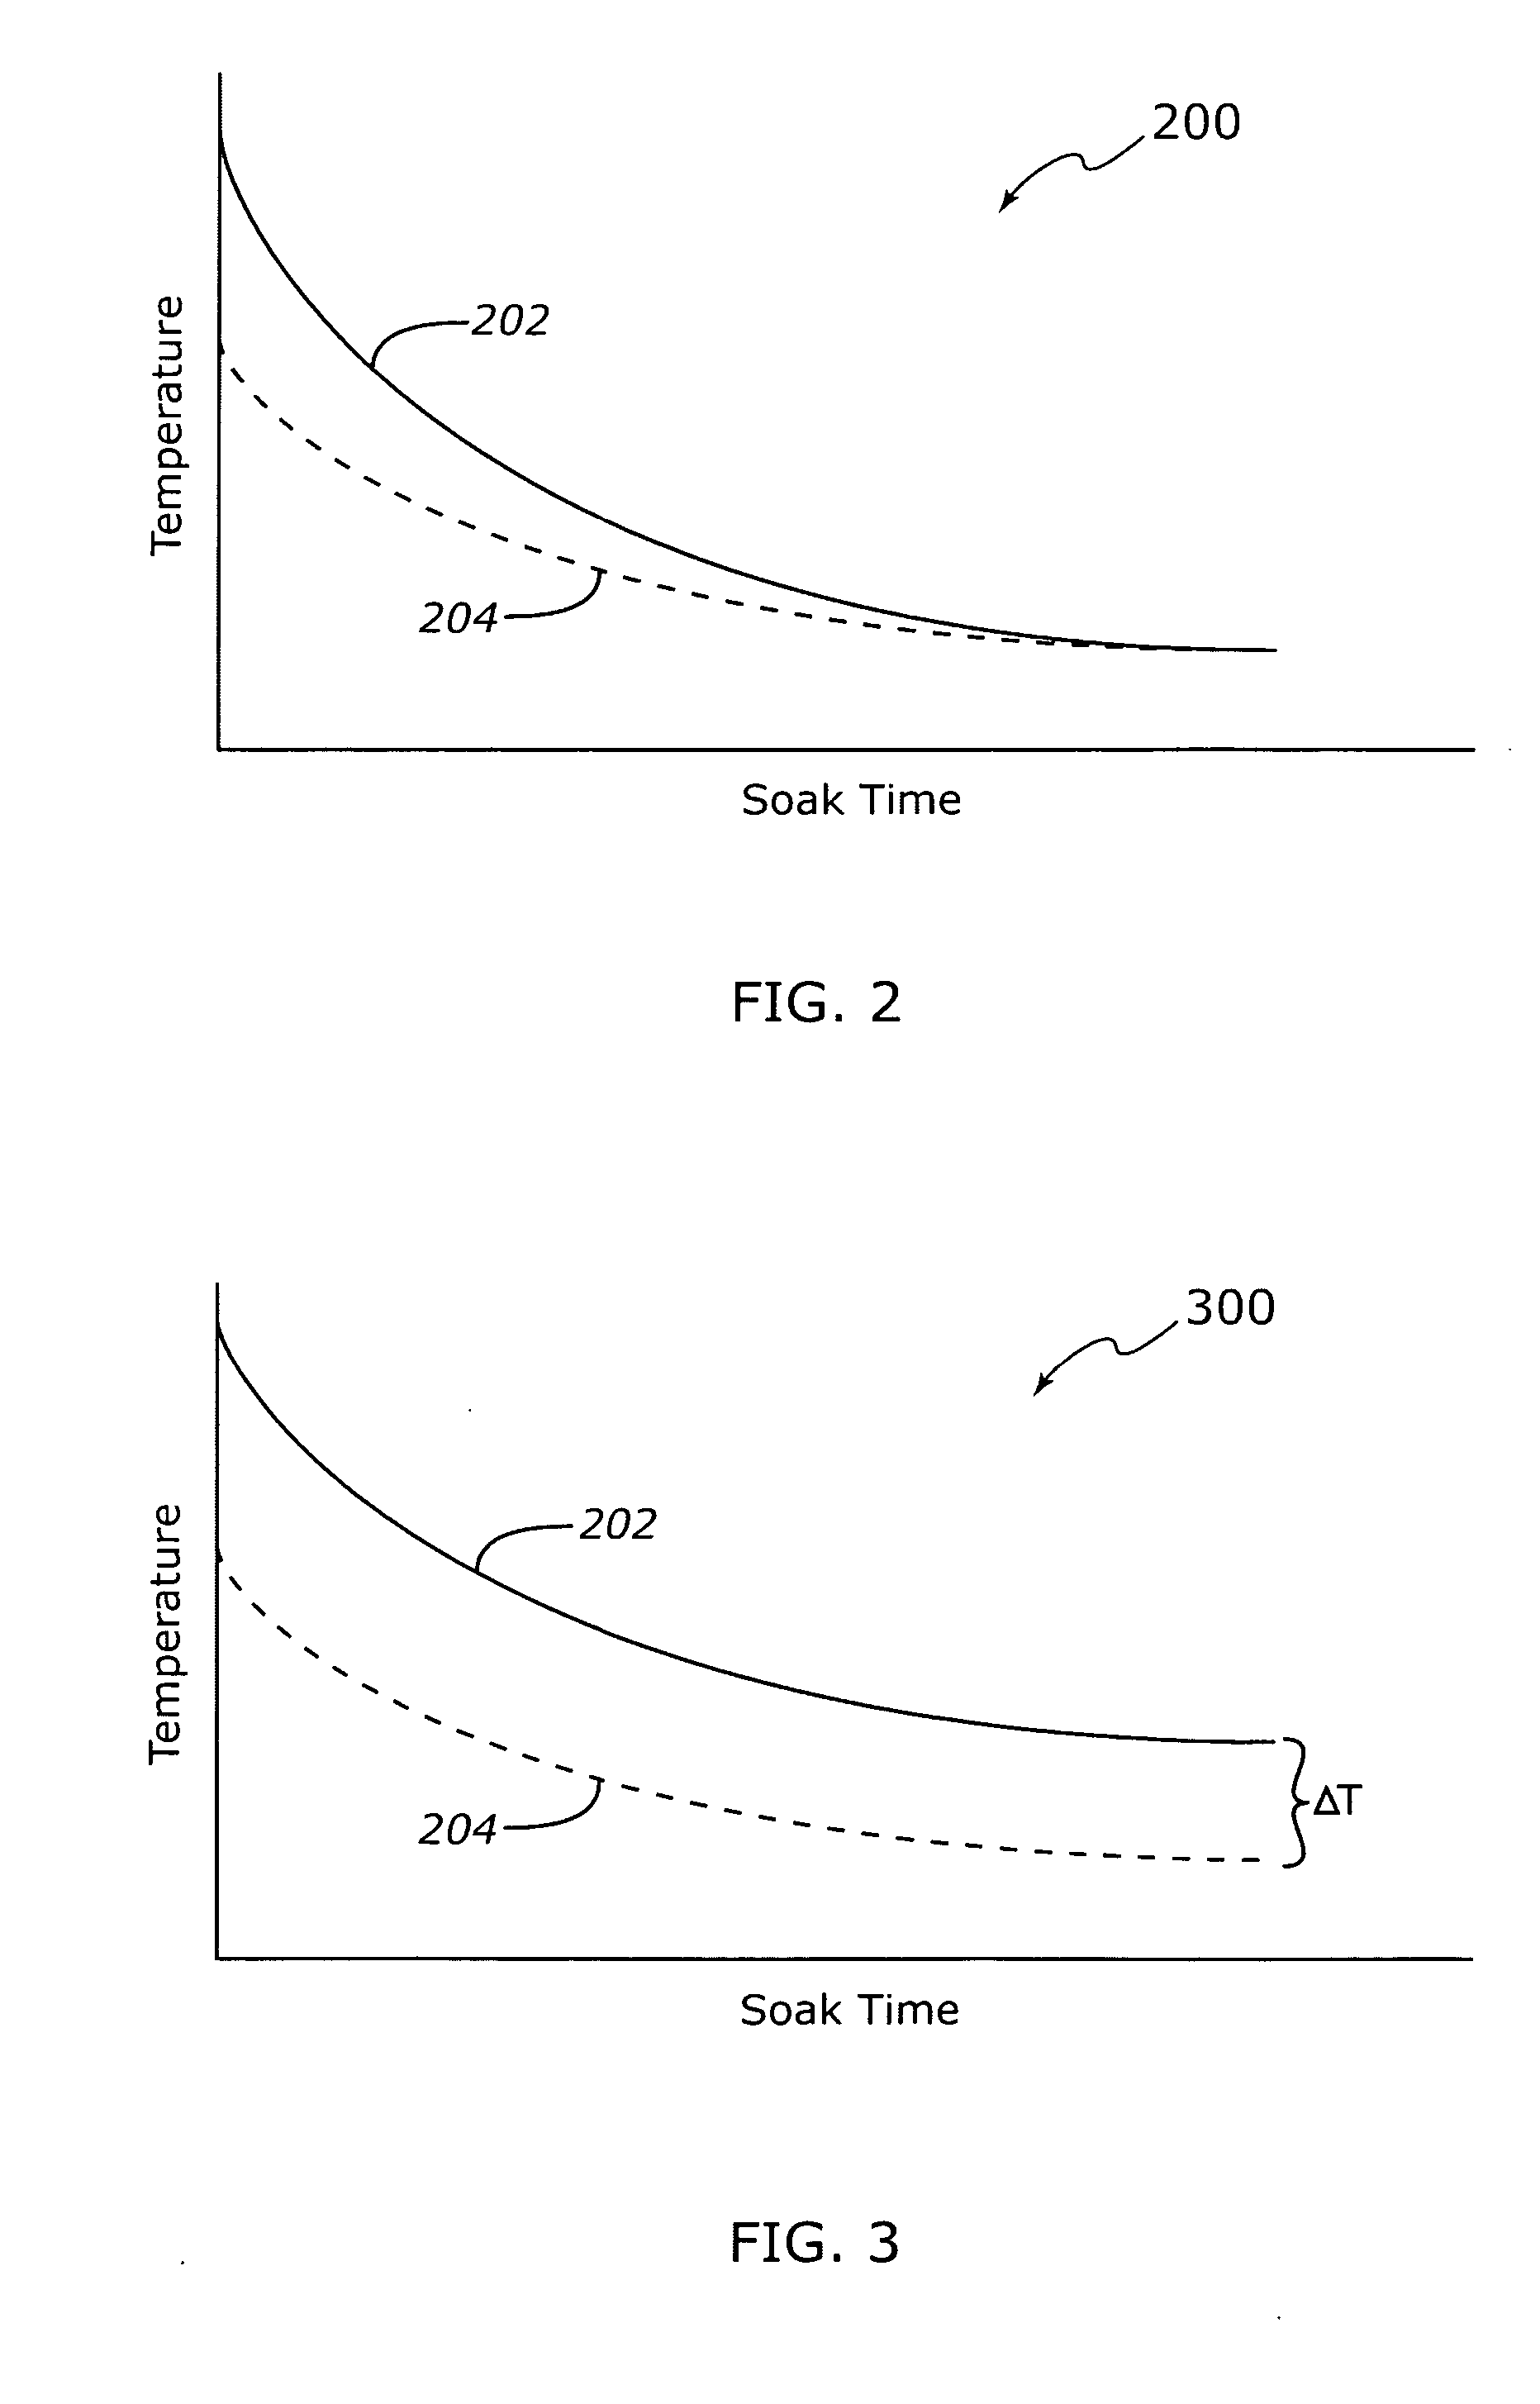 Method and apparatus for determining coolant temperature rationality in a motor vehicle